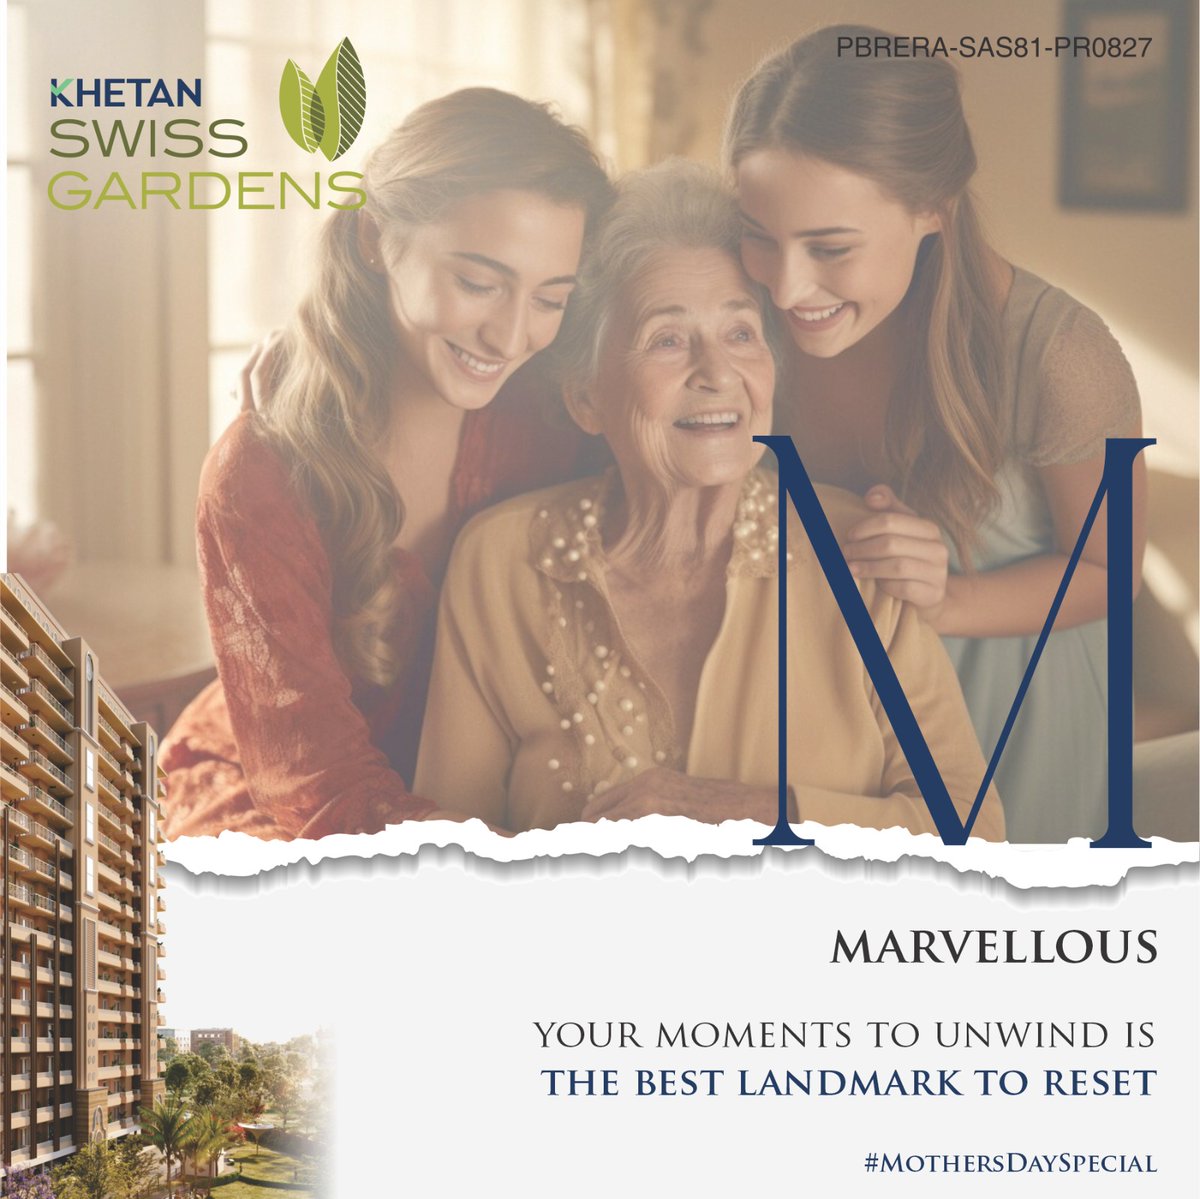 Experience the serene oasis of #KHETANSWISSGARDENS, a sanctuary where #MOTHERHOOD reigns supreme and every corner reflects Her Love and Protection. Celebrate #MOTHERSDAY by Acknowledging the Heart of Every Family. Call: 98784 33379 Vsit: Sector 126, On Airport Road, Mohali